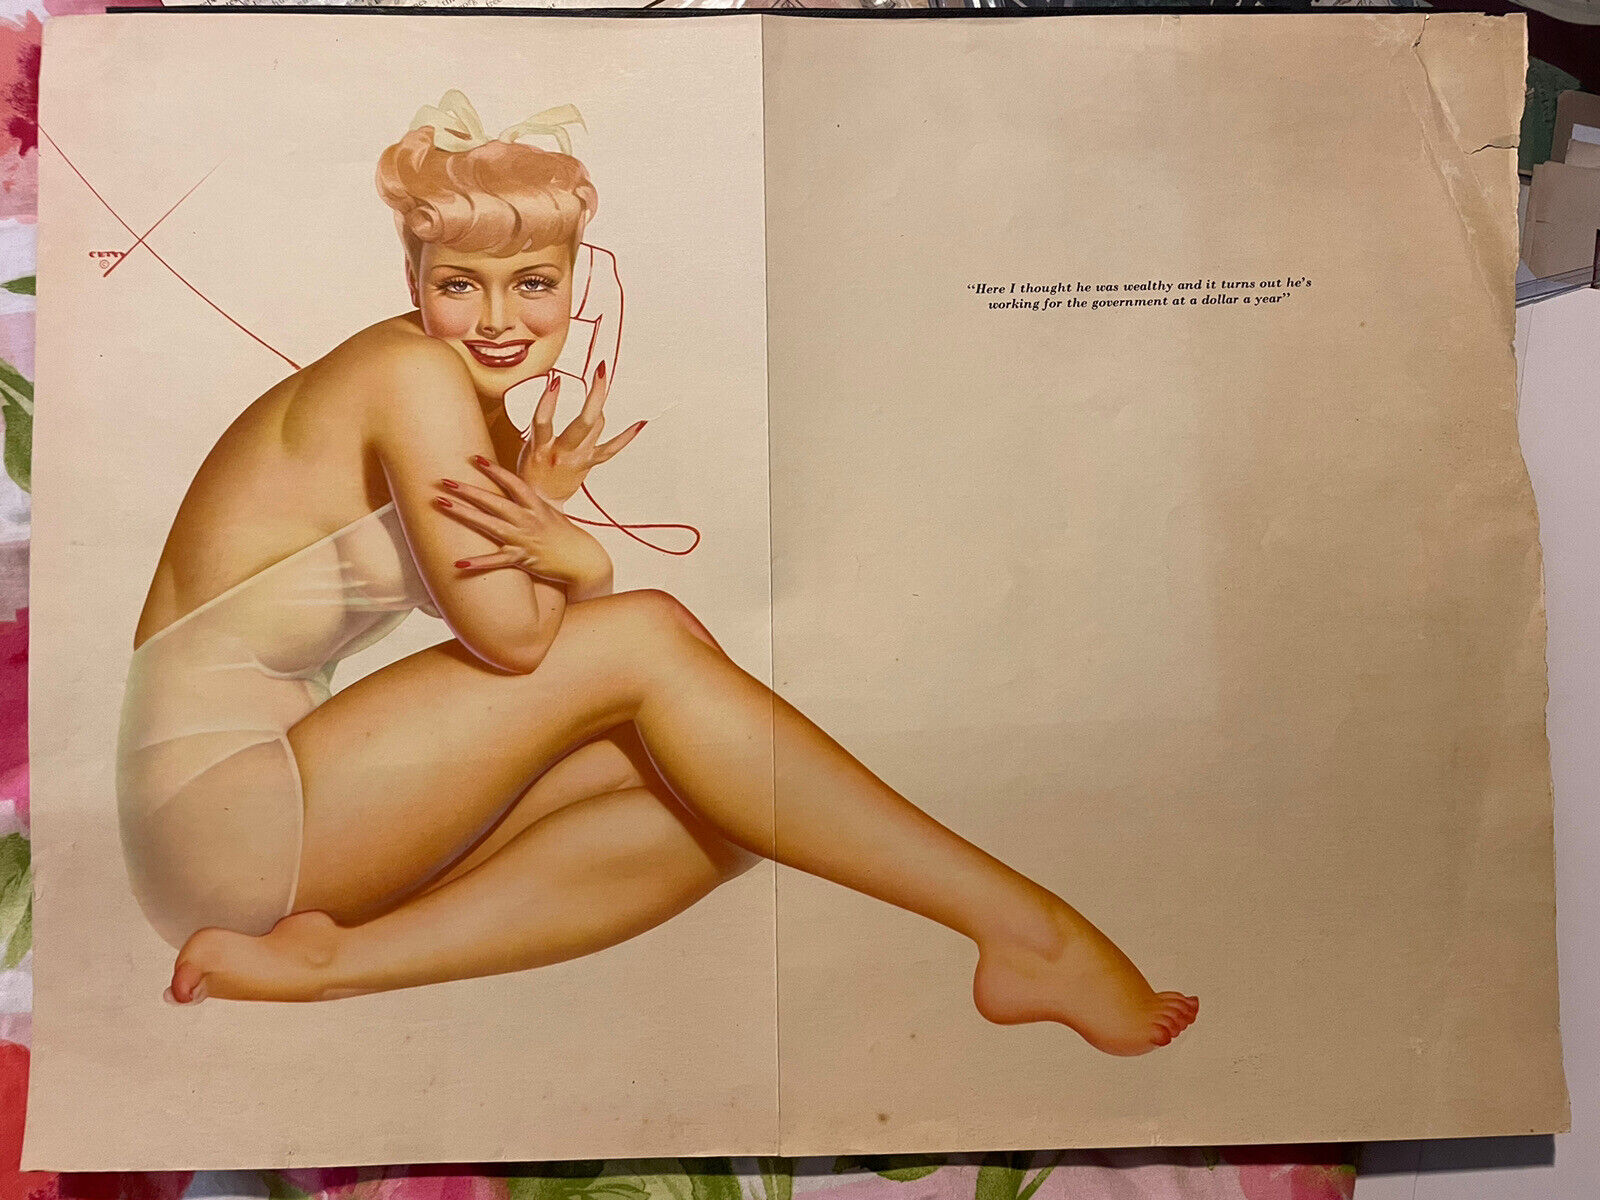 Vtg 1950s Esquire Pinup Magazine Centerfold Picture by Petty Blond on Phone